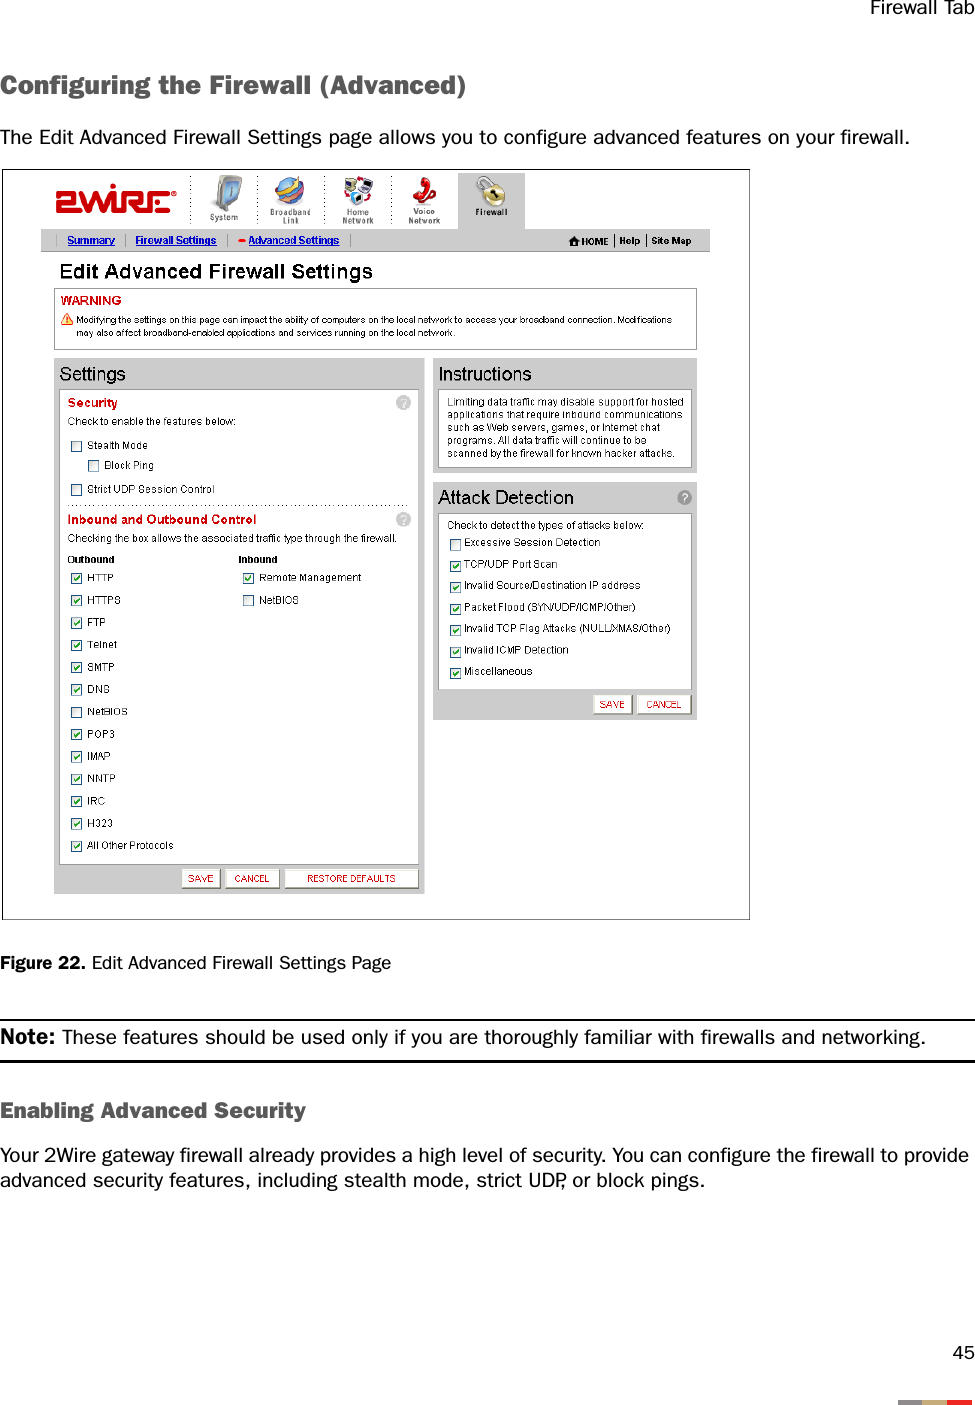 Firewall Tab45Configuring the Firewall (Advanced)The Edit Advanced Firewall Settings page allows you to configure advanced features on your firewall.Figure 22. Edit Advanced Firewall Settings PageNote: These features should be used only if you are thoroughly familiar with firewalls and networking.Enabling Advanced SecurityYour 2Wire gateway firewall already provides a high level of security. You can configure the firewall to provide advanced security features, including stealth mode, strict UDP, or block pings.